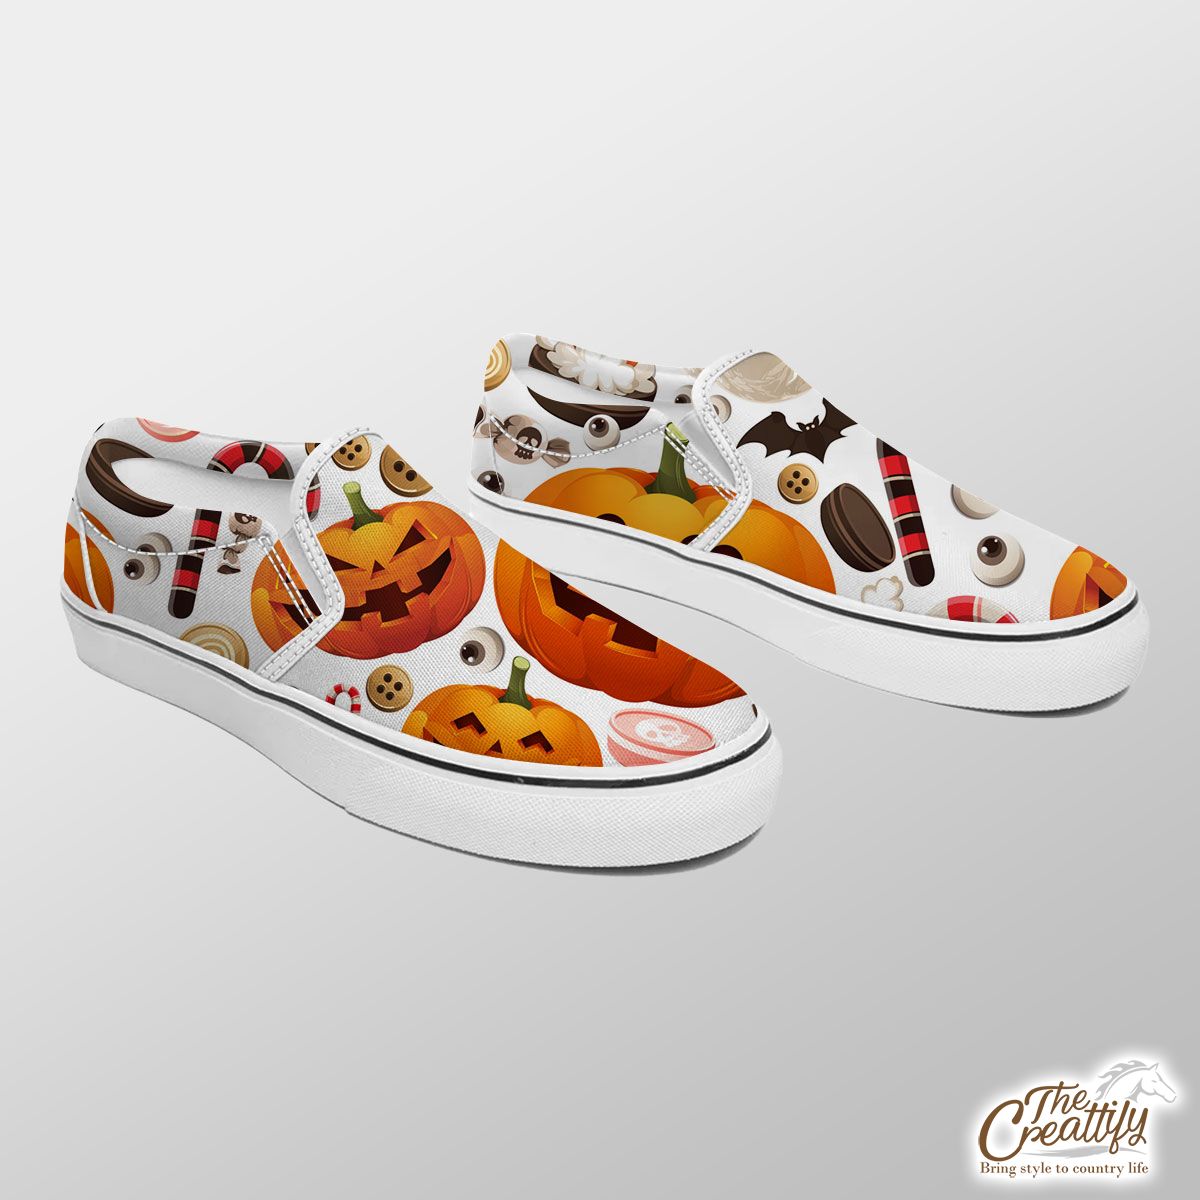 Halloween Party Food On White Background Slip On Sneakers